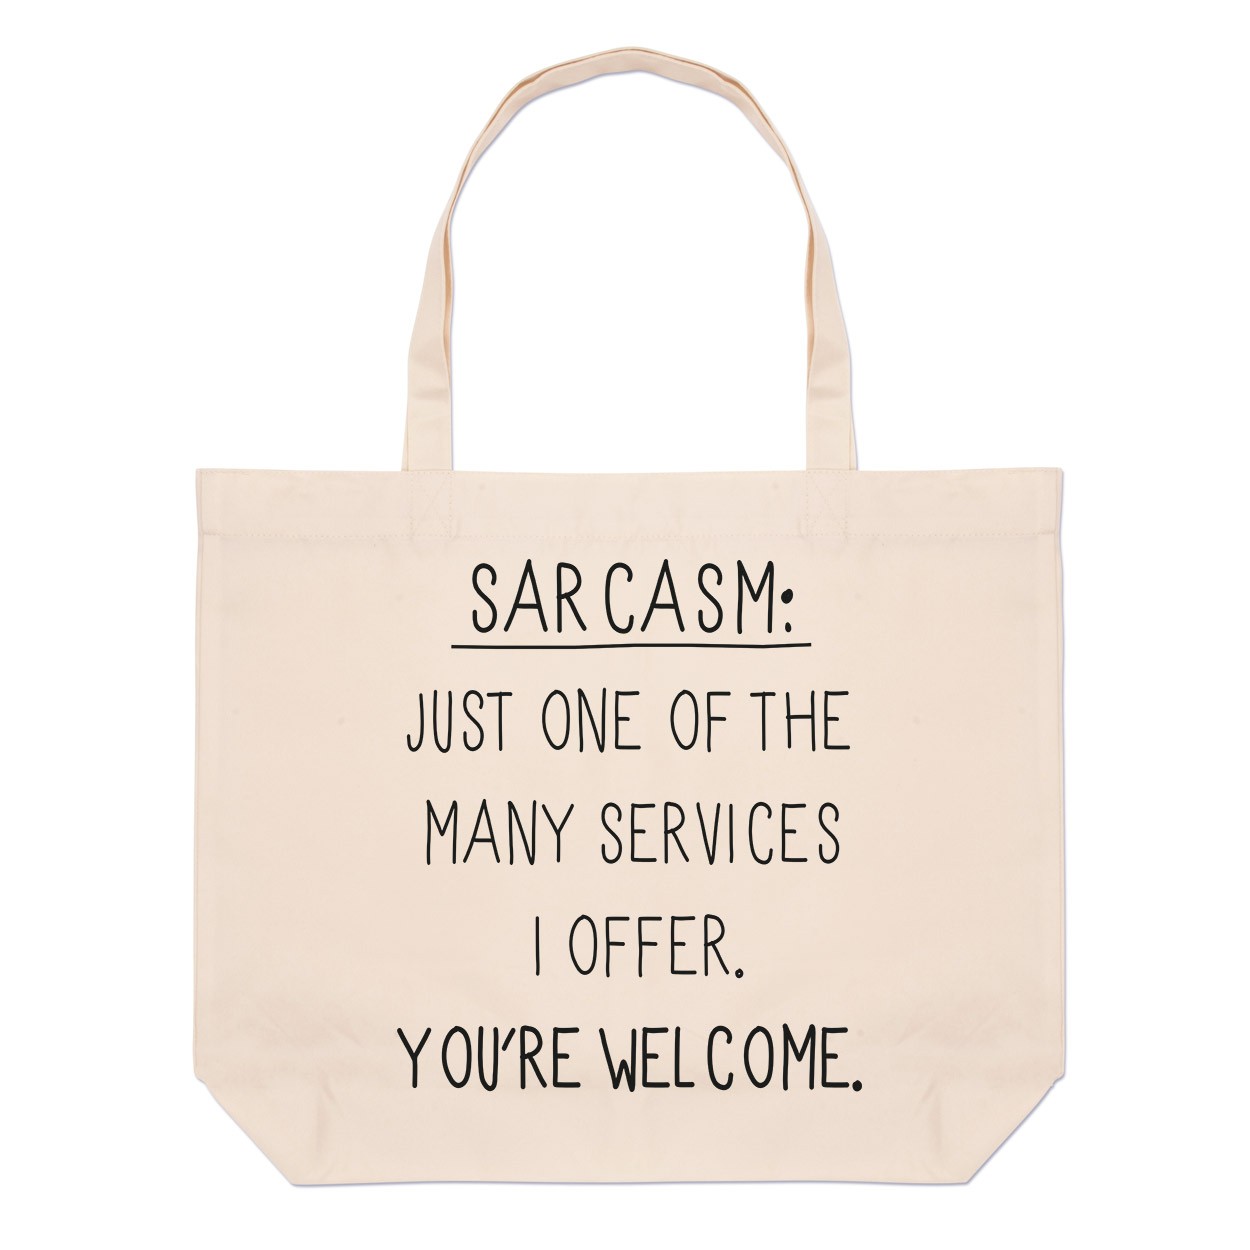 Sarcasm One Of The Many Services Large Beach Tote Bag